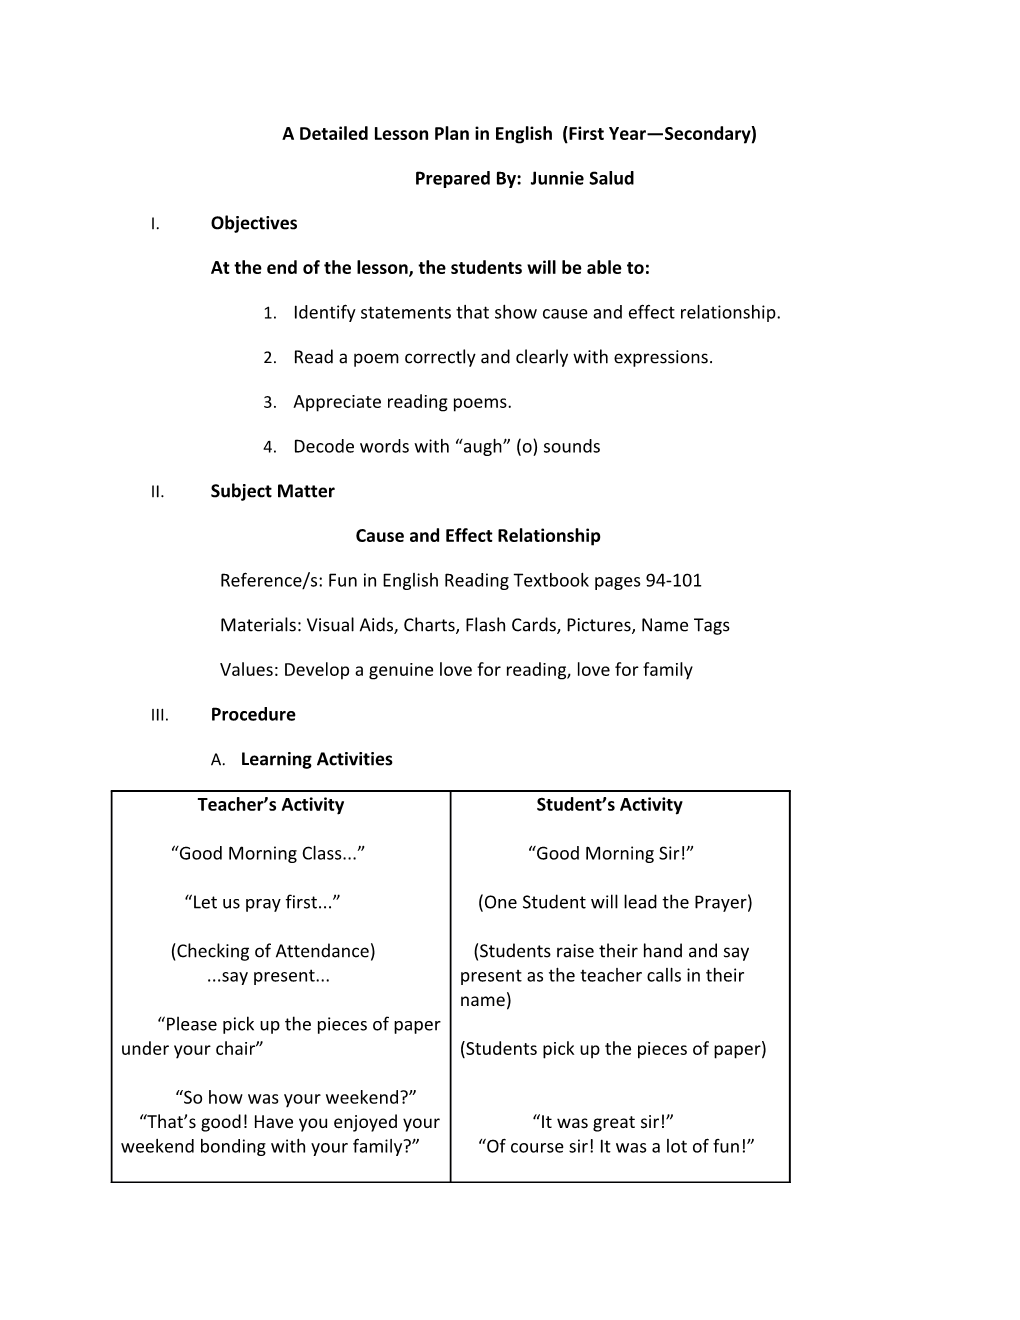 A Detailed Lesson Plan in English (First Year Secondary)